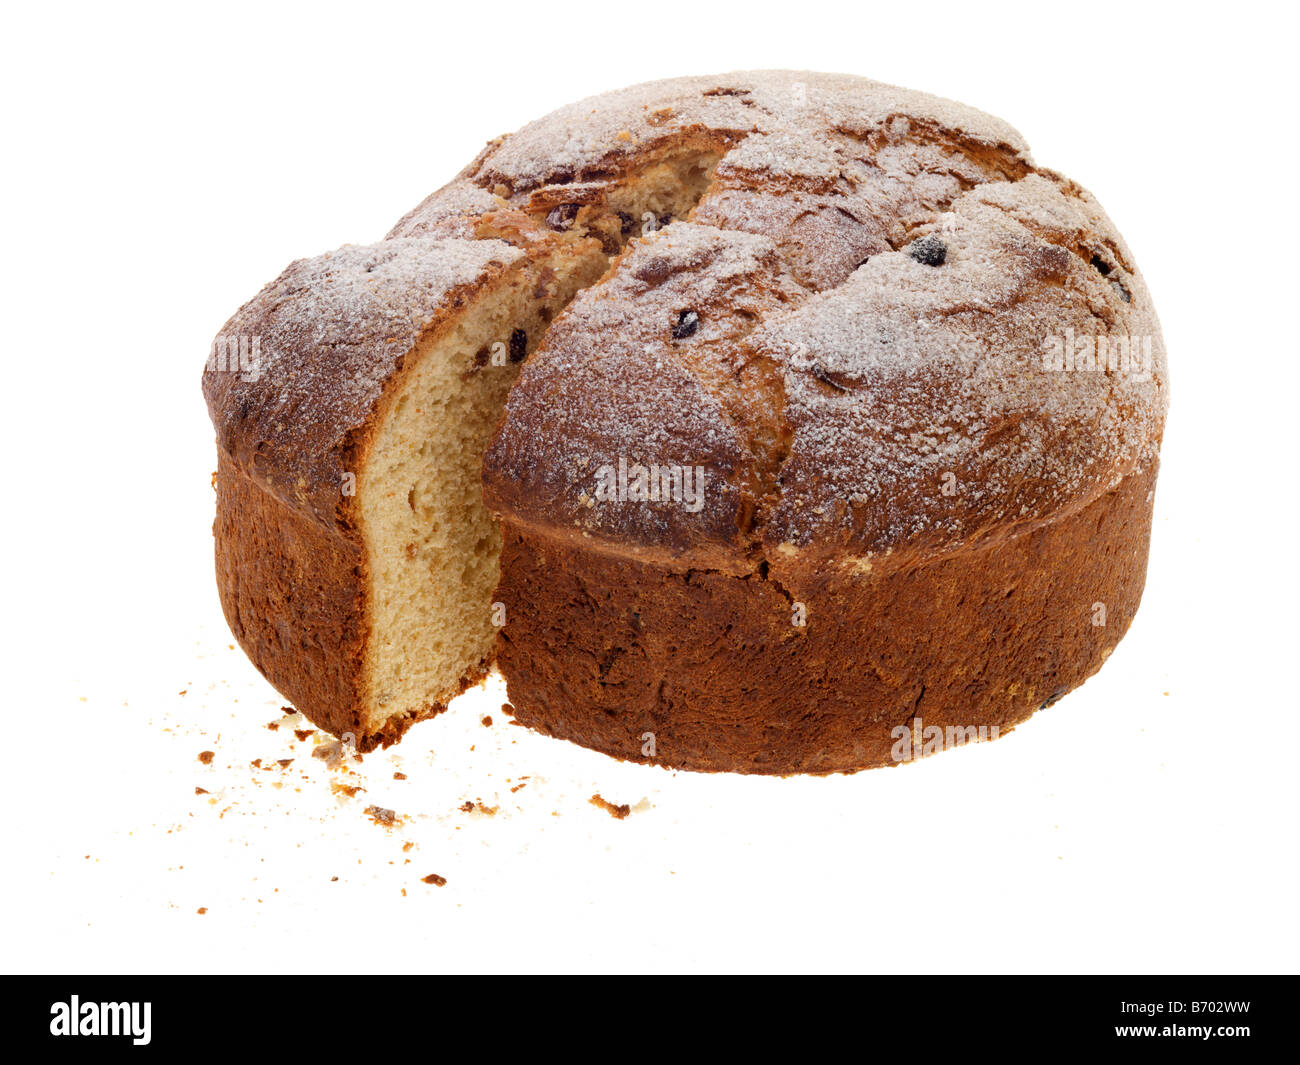 Freshly Baked Traditional Christmas Festive Season Panettone Fruit Cake Isolated Against A White Background With A Clipping Path And No People Stock Photo